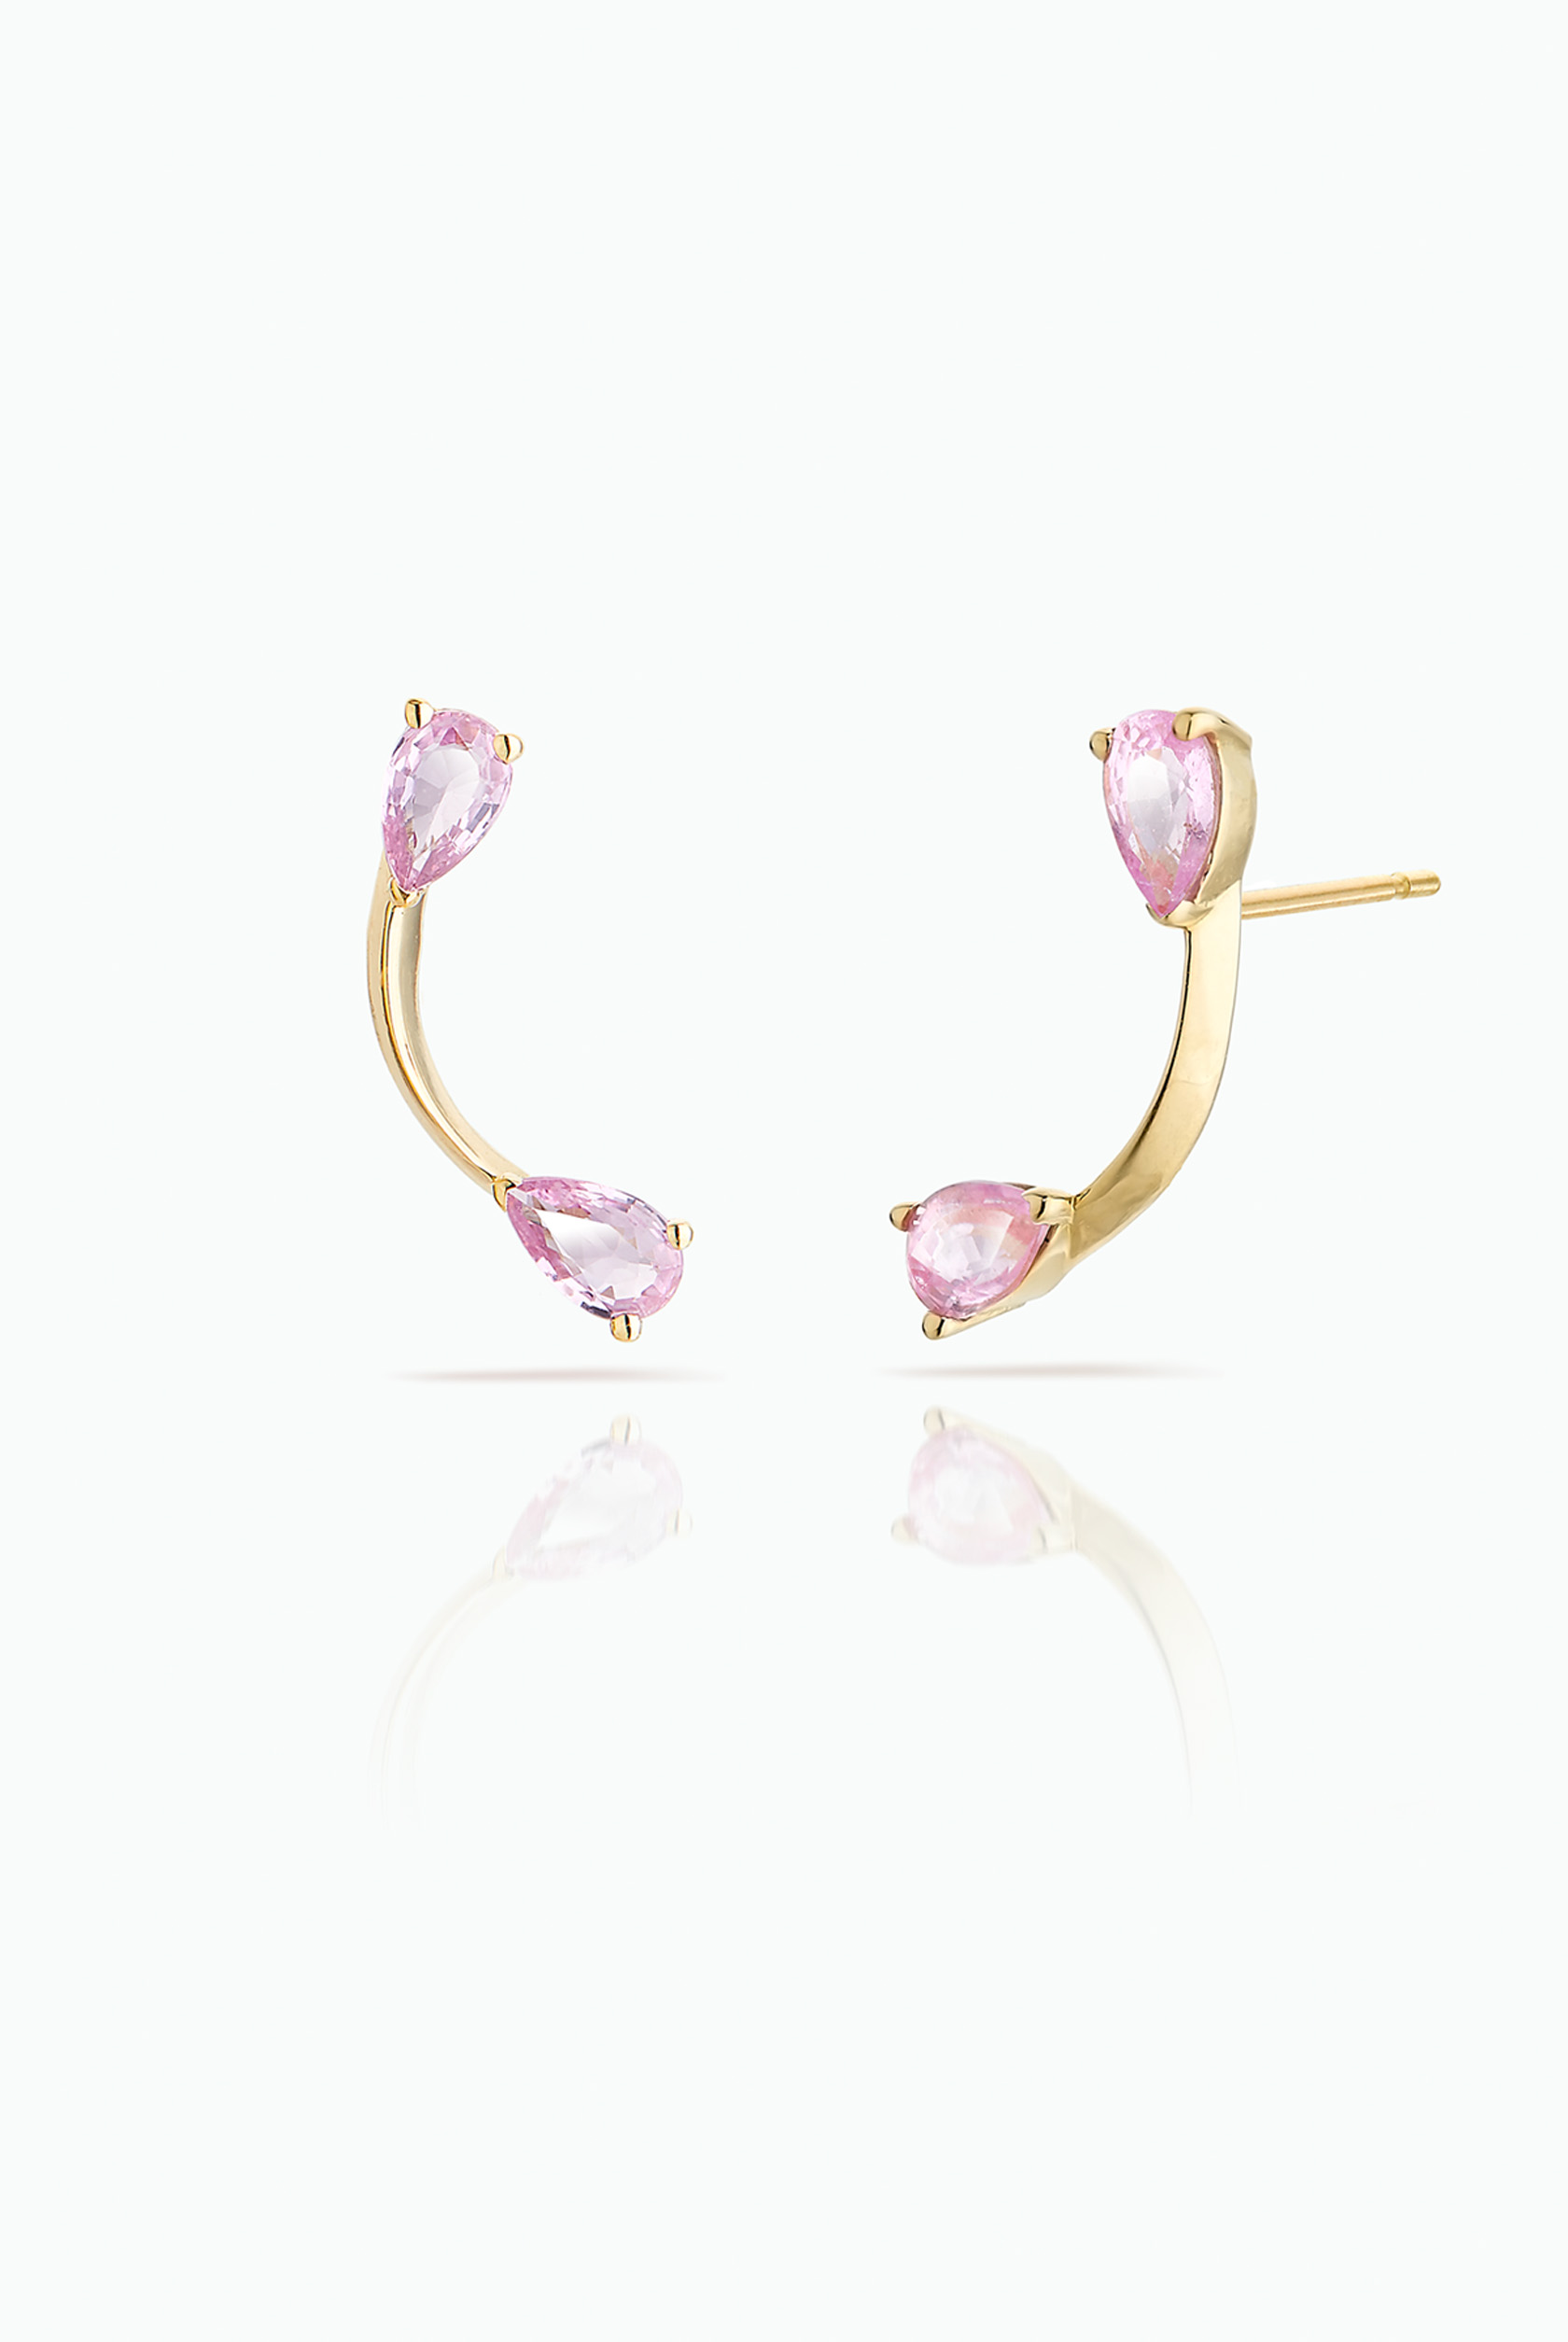 PINK FLARE STUDS - Sapphire & 18K Gold - Le-ster